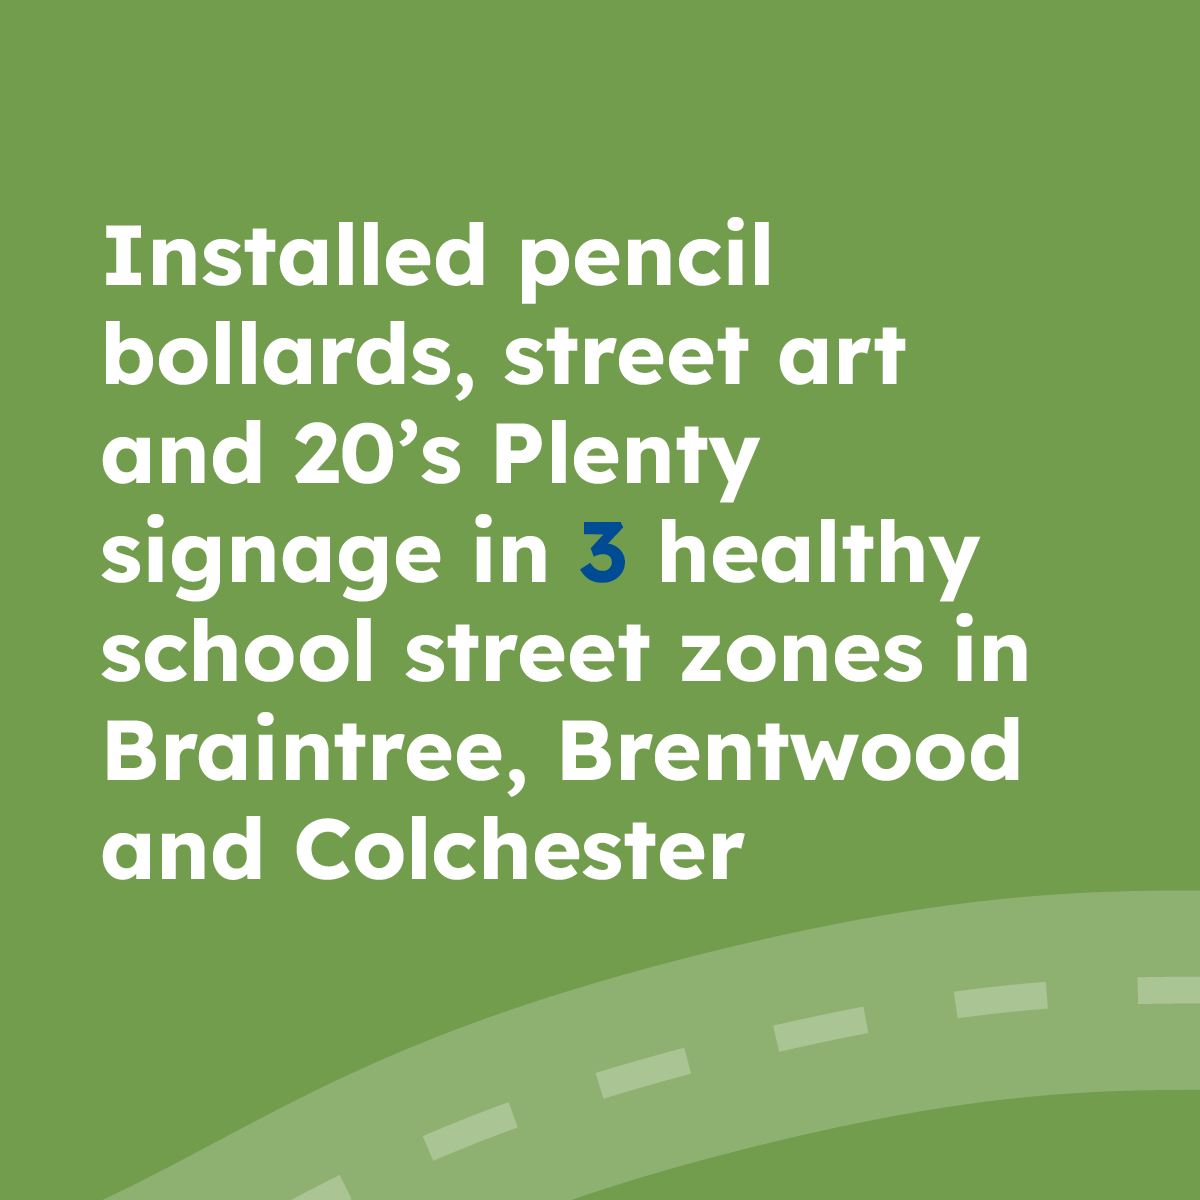 Installed pencil bollards, street art and 20's Plenty signage in 3 healthy school street zones in Braintree, Brentwood and Colchester